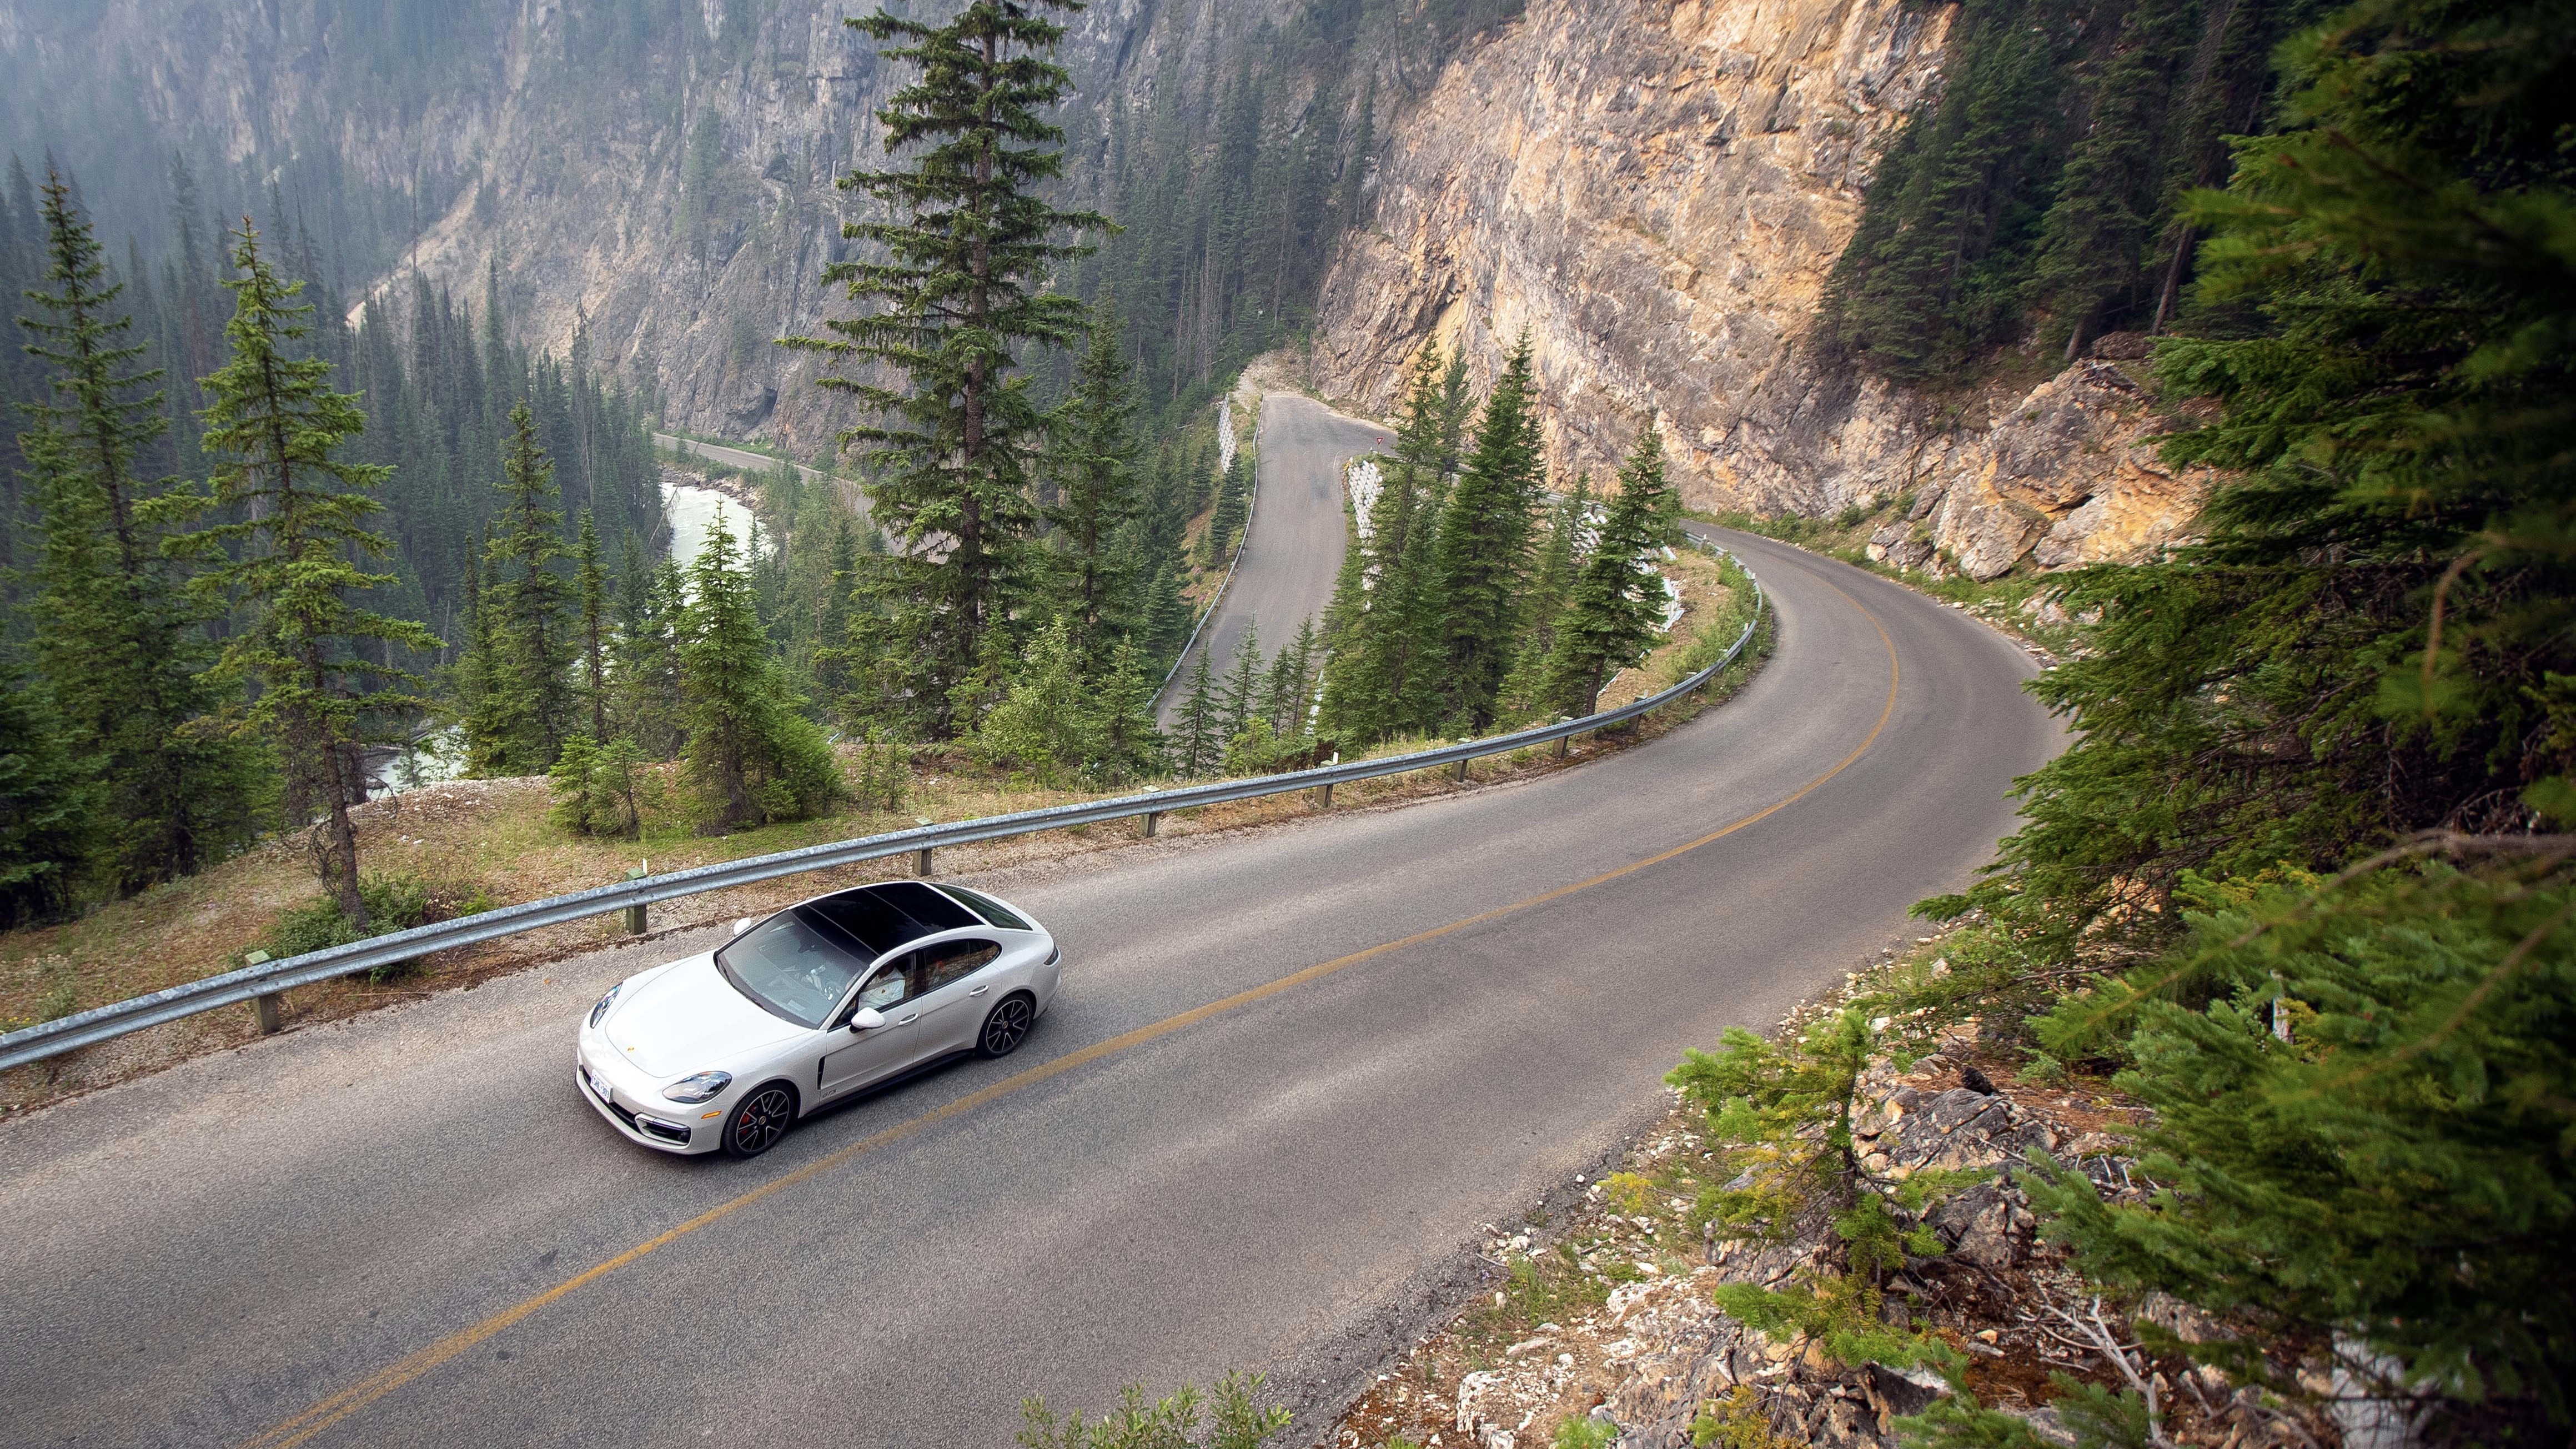 Porsche Panamera on a mountain road in the Canadian Rockies